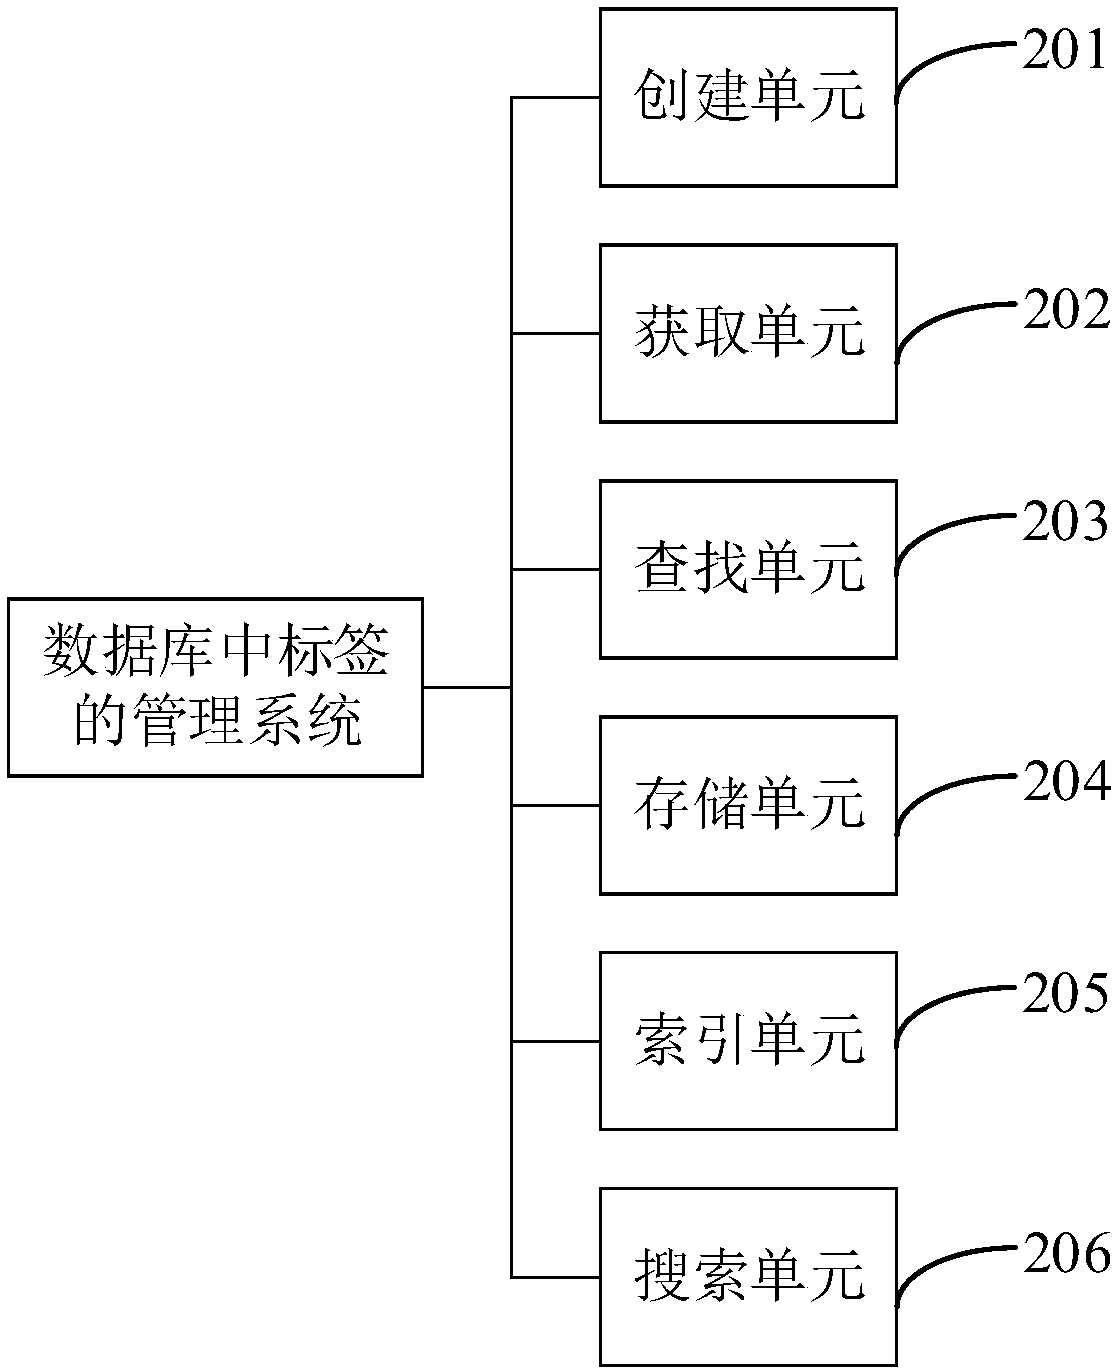 Method and system for managing tags in database